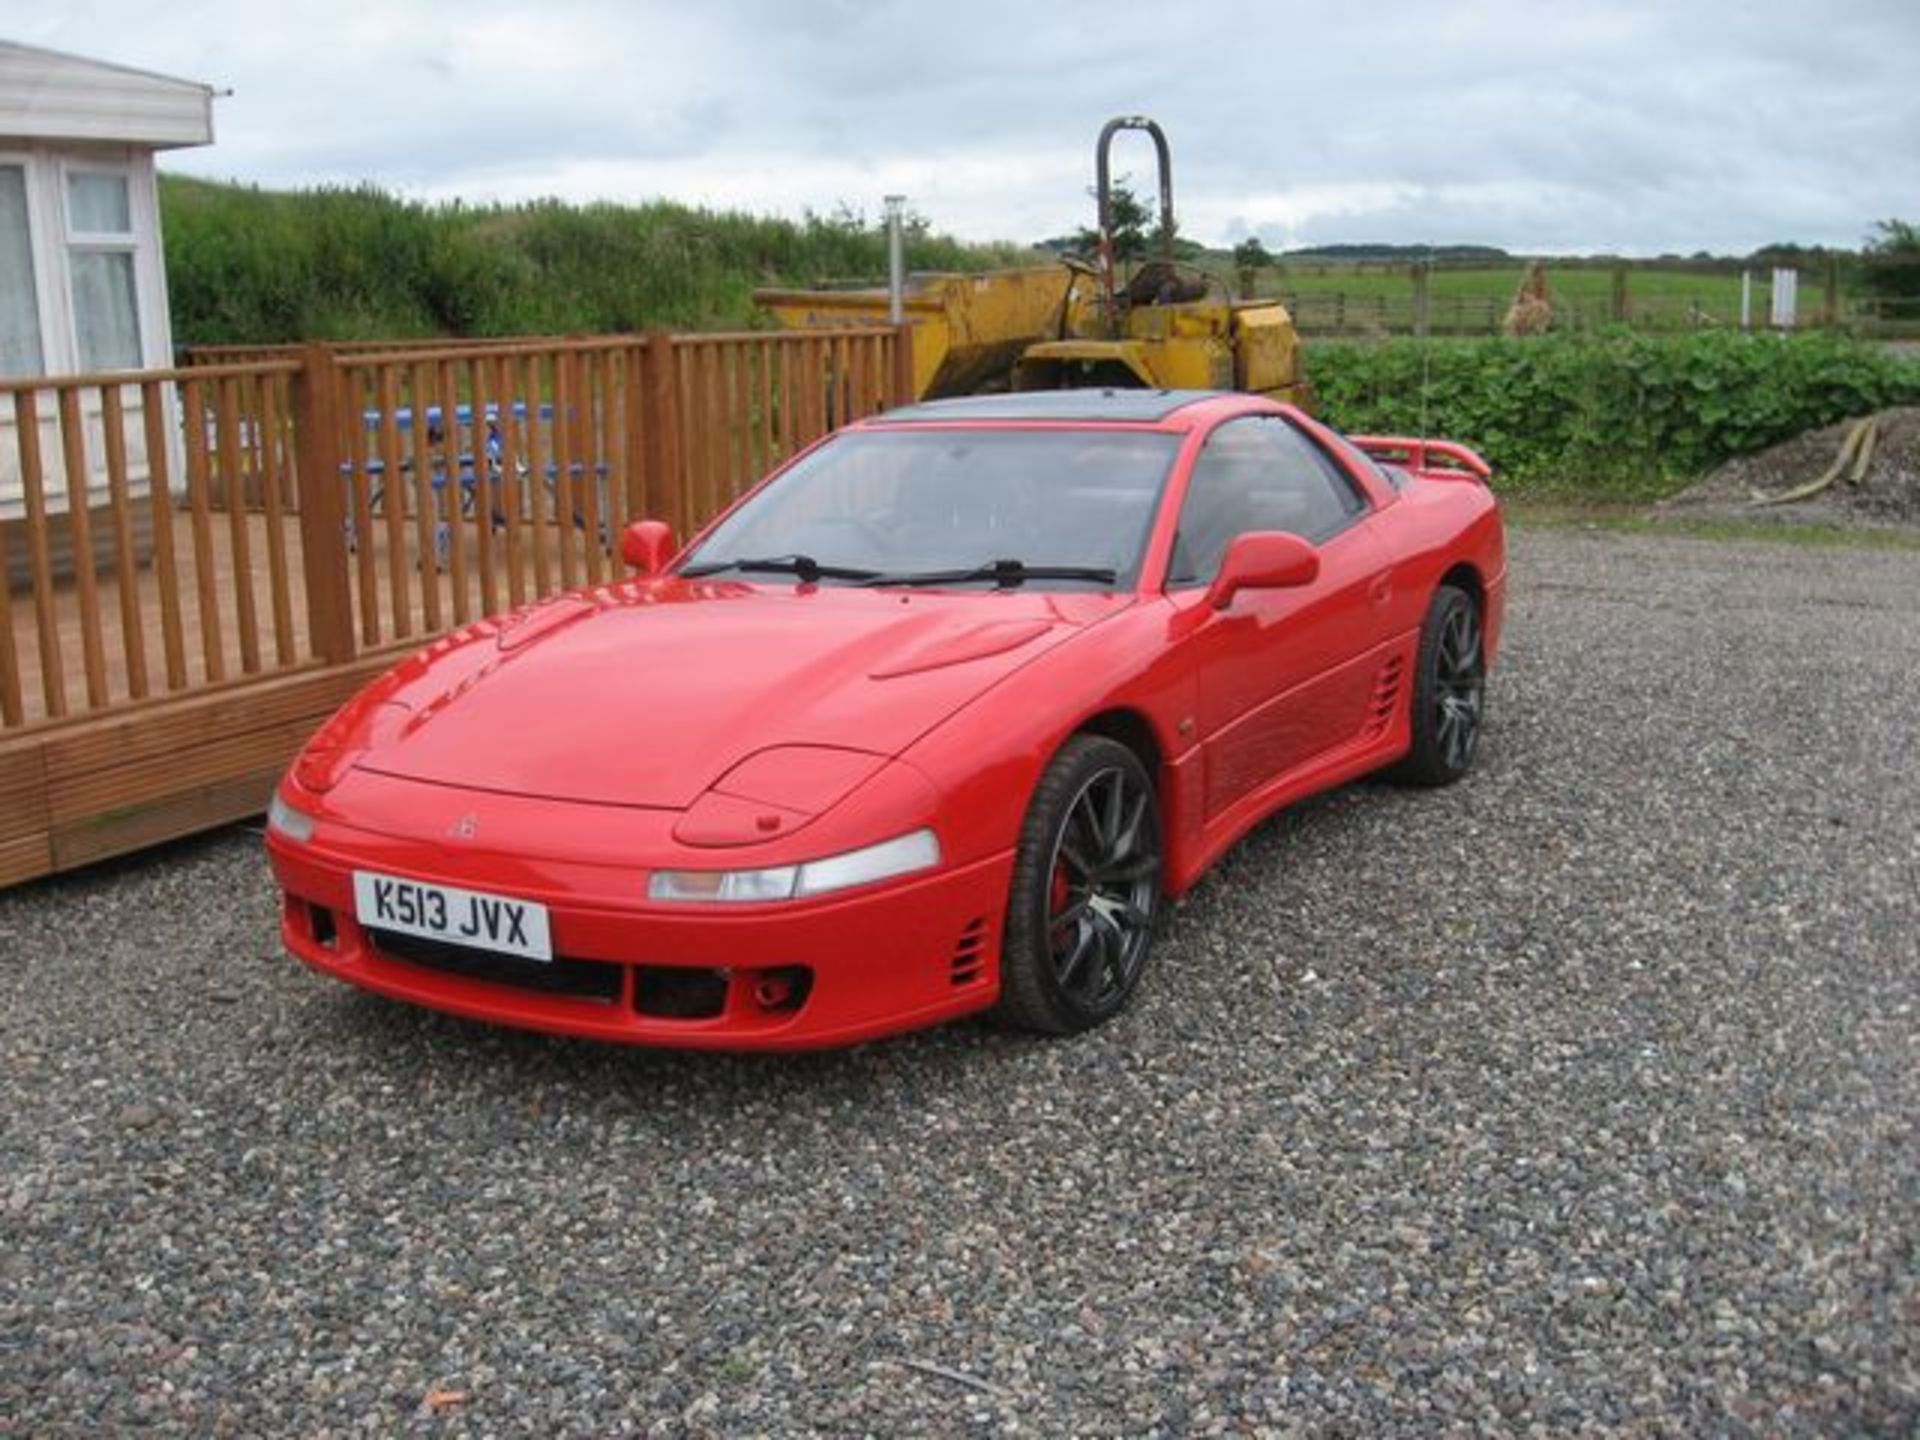 MITSUBISHI, 3000 GT V6 TURBO - 2972cc, Chassis number JMAMNZ16APY000228 - presented with an - Image 2 of 17